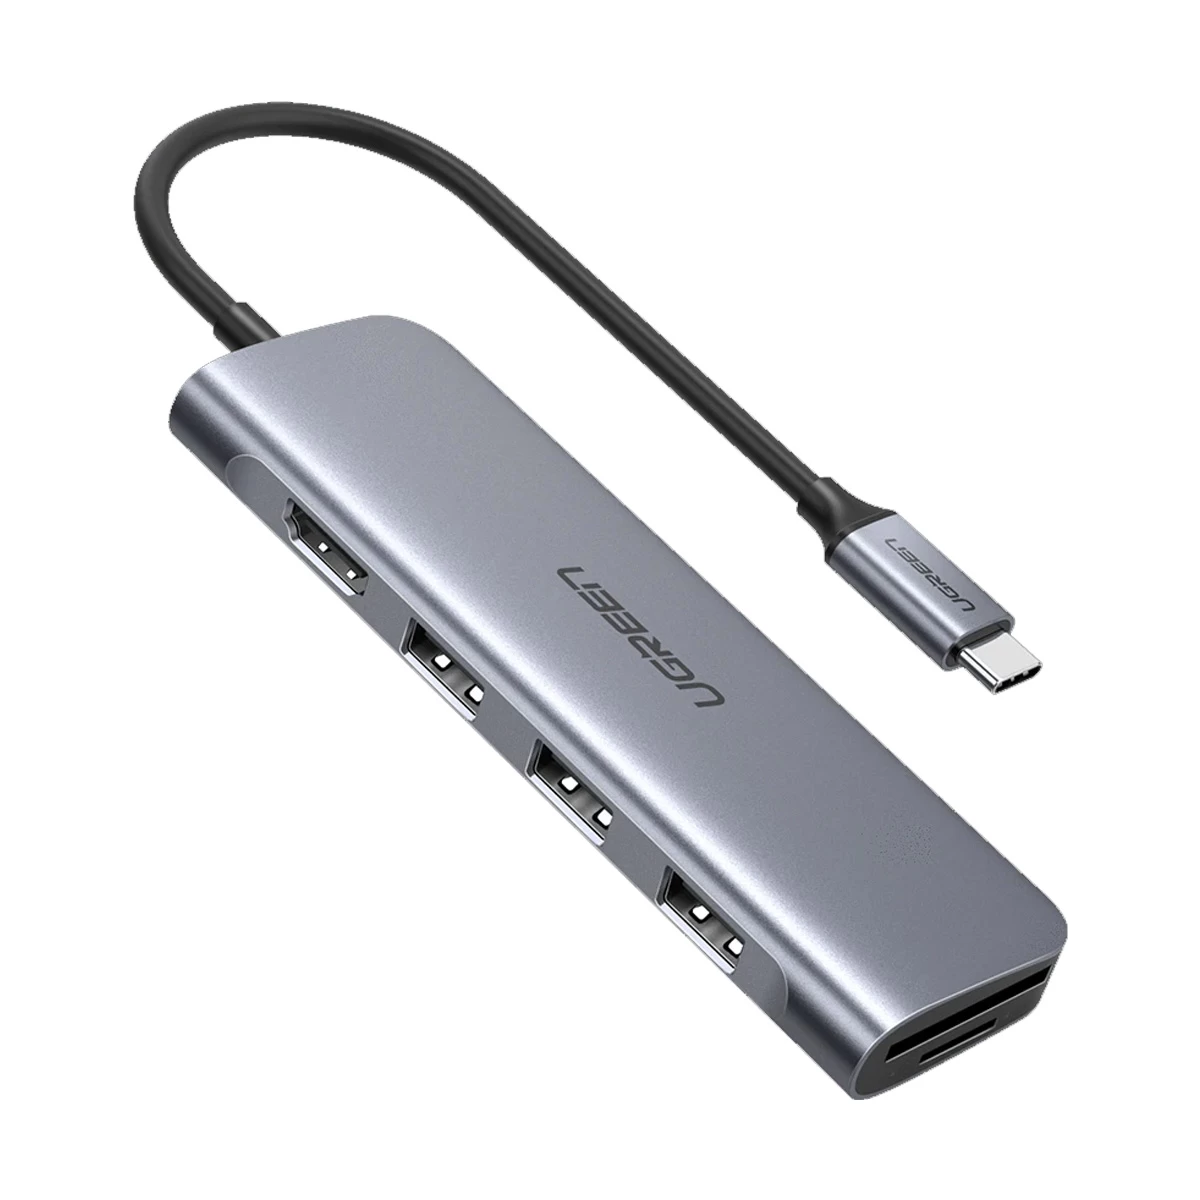 Type C To HDMI With PD Charging and USB 3.0 Adapter – Honeywell Connection